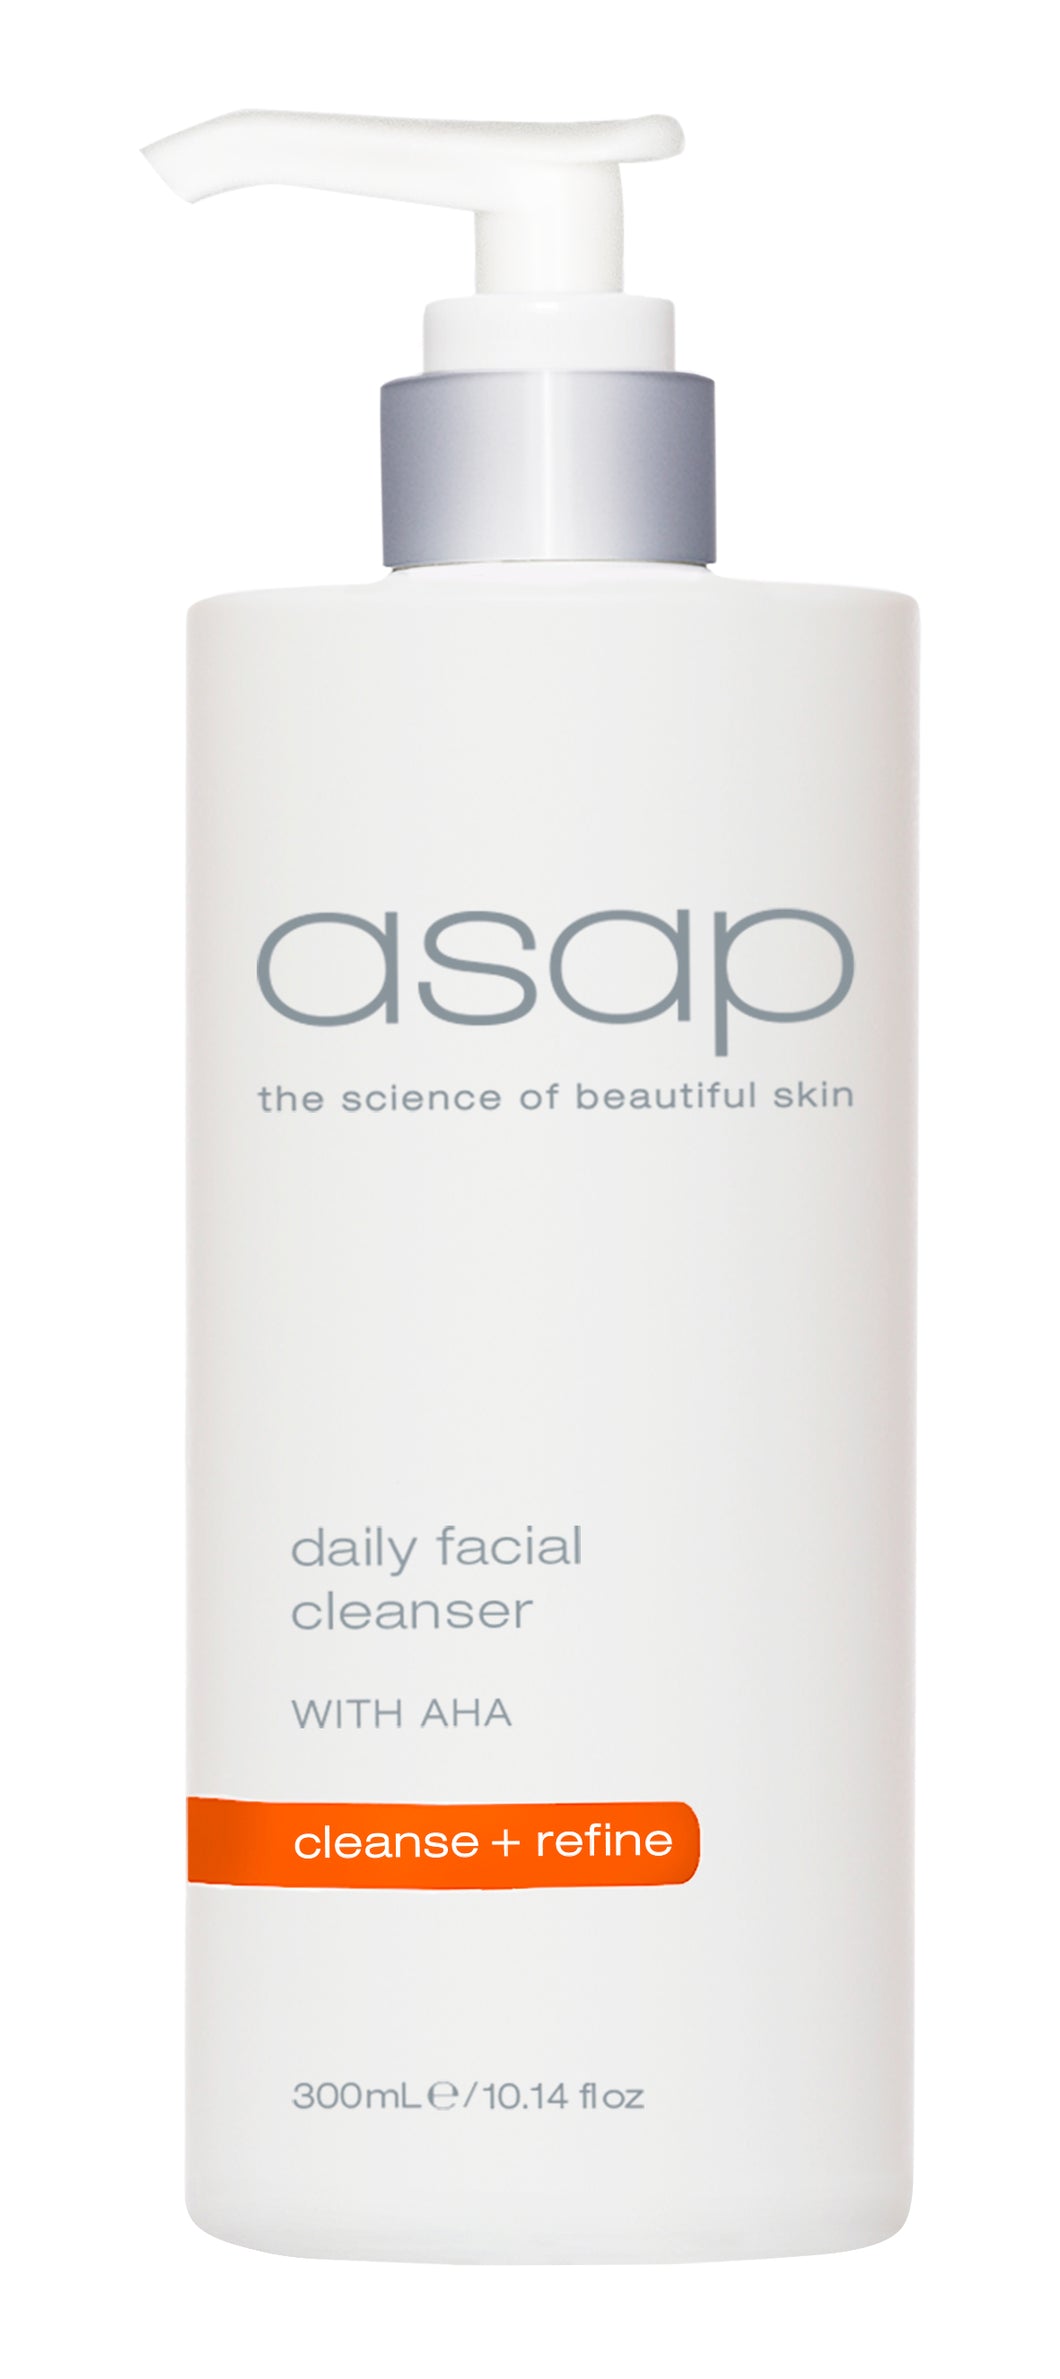 asap daily facial cleanser 300ml Limited Edition